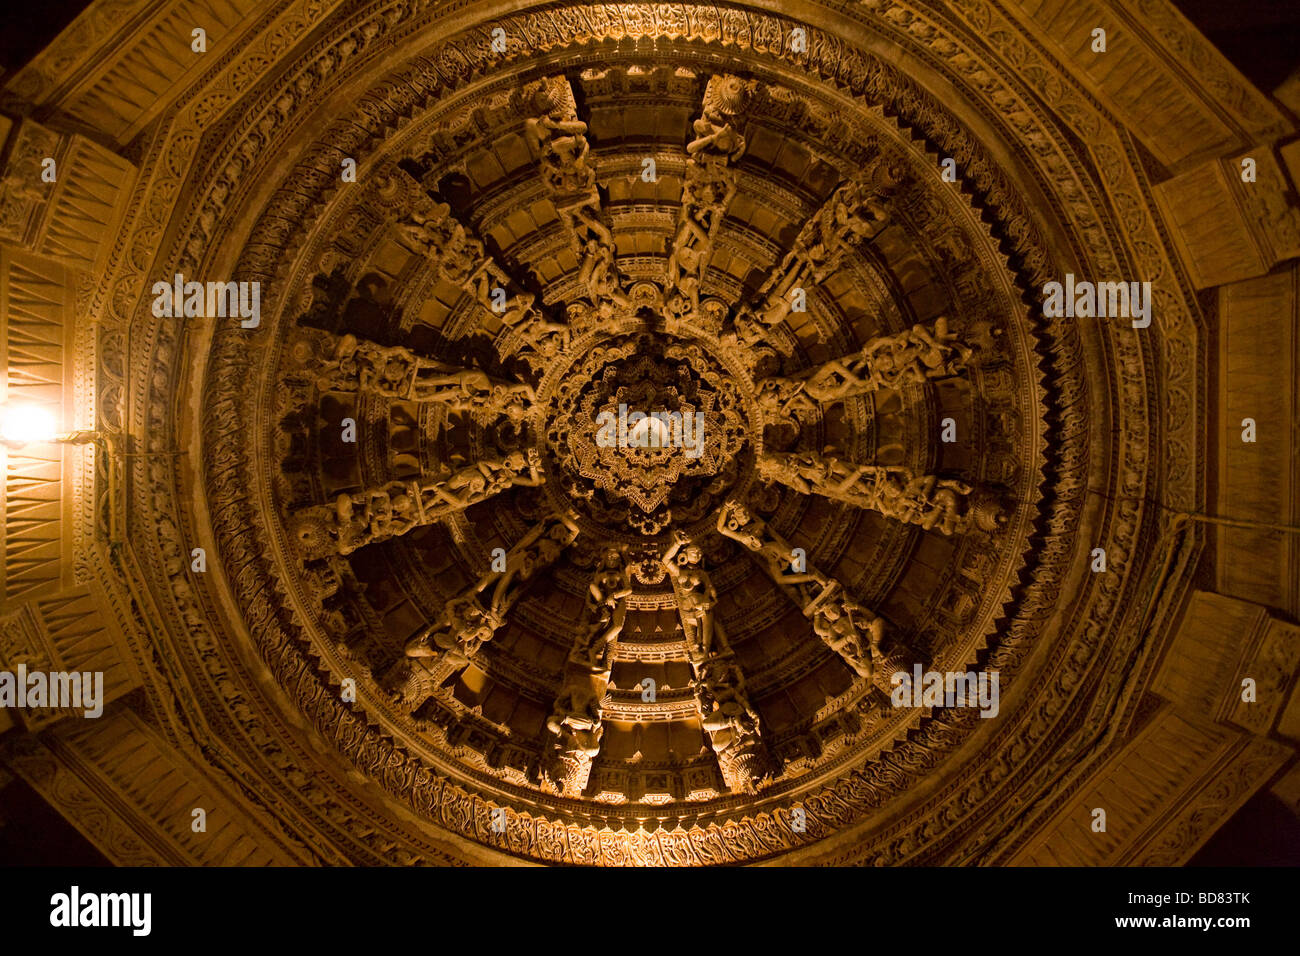 Incredible carved detail on a Jain temple roof in Jaisalmer, India Stock Photo